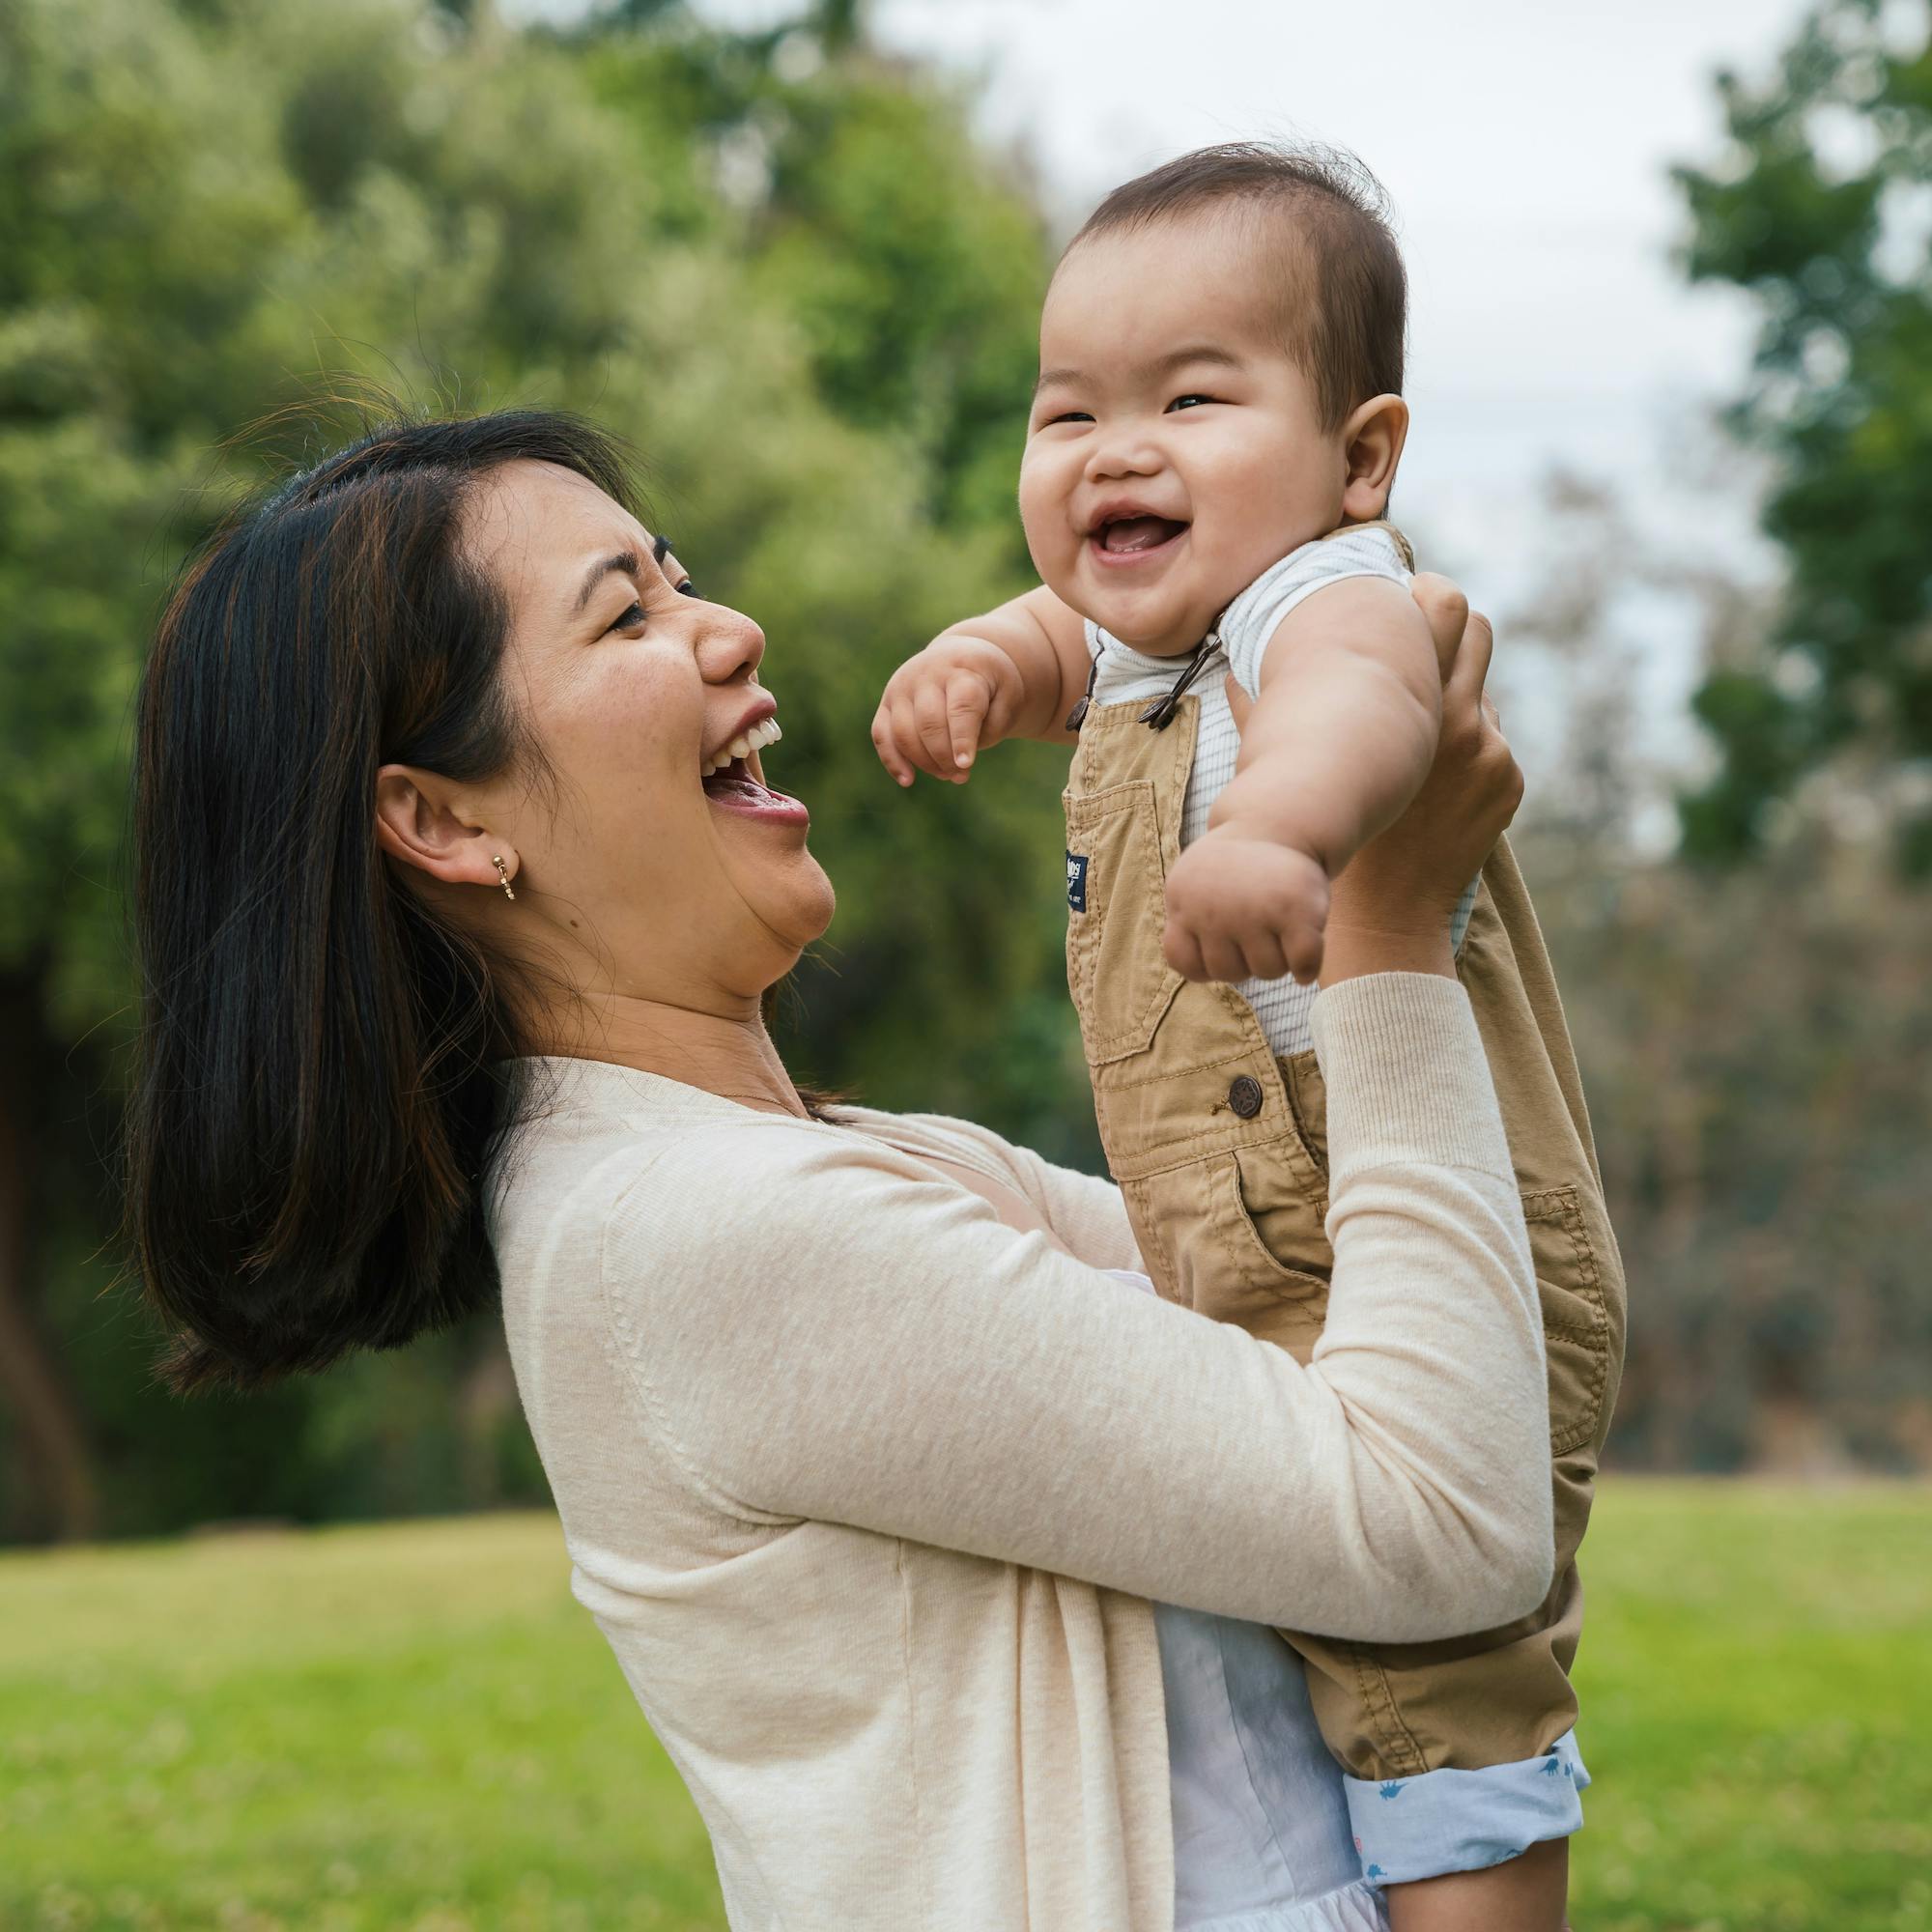 A joyful mother lifting her laughing baby in the air at a park.